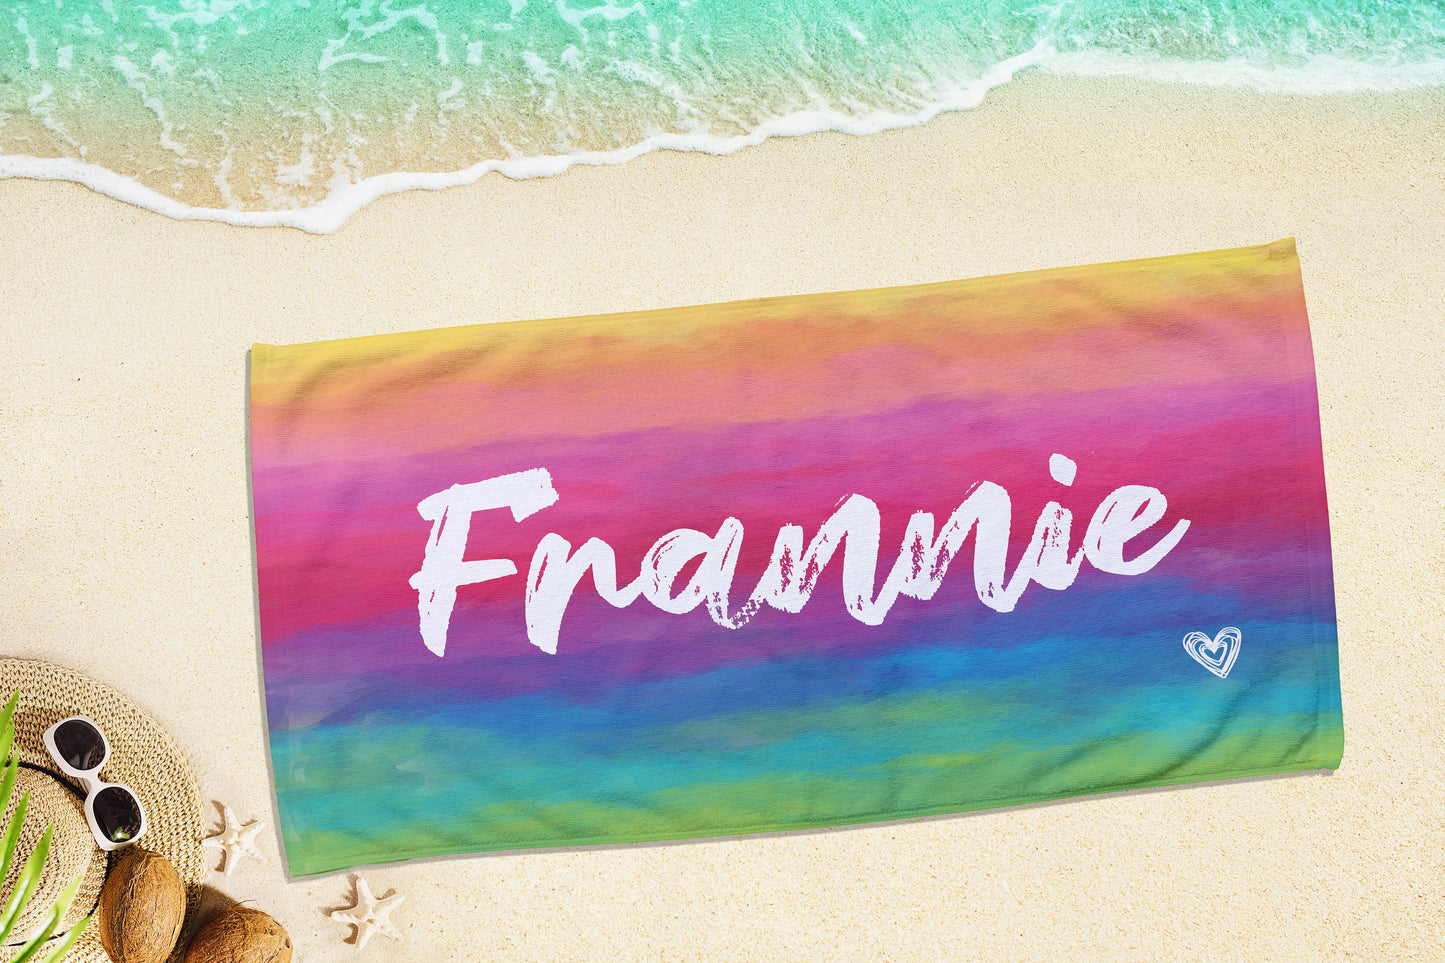 Multi-Color Tie Dye Style Personalized Beach Towel Personalized Name Bath Towel Custom Pool Towel Beach Towel With Name Outside Birthday